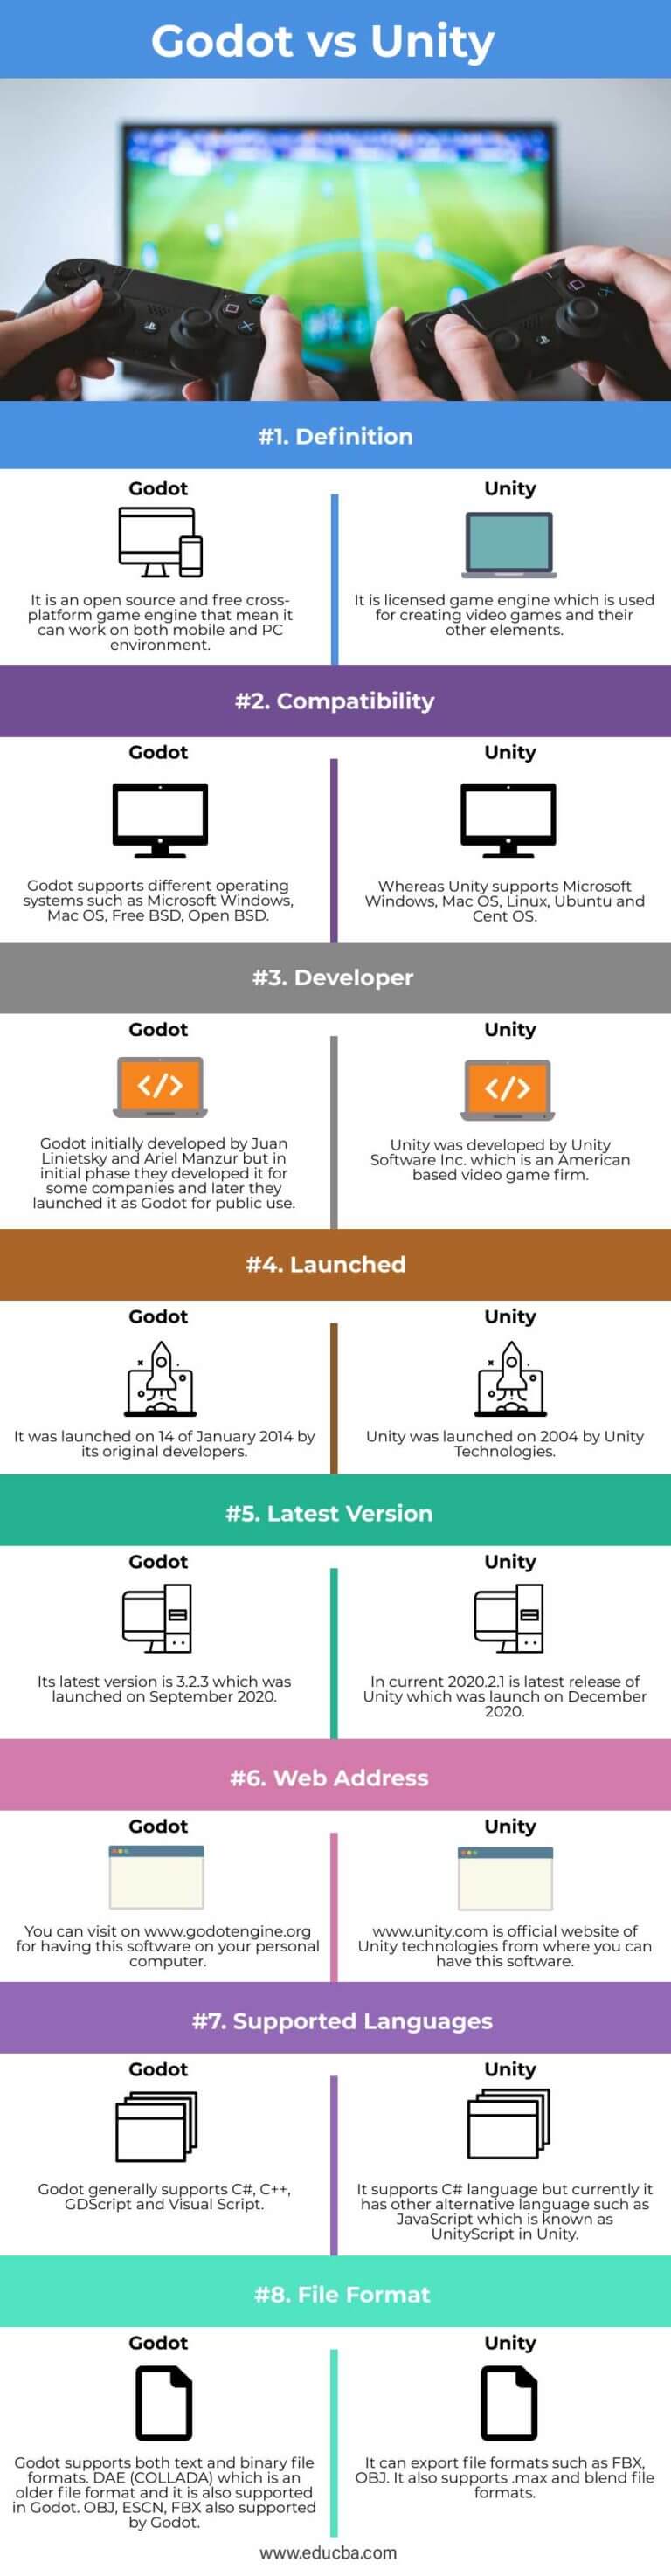 Godot vs Unity Top 8 Differences You Should Know